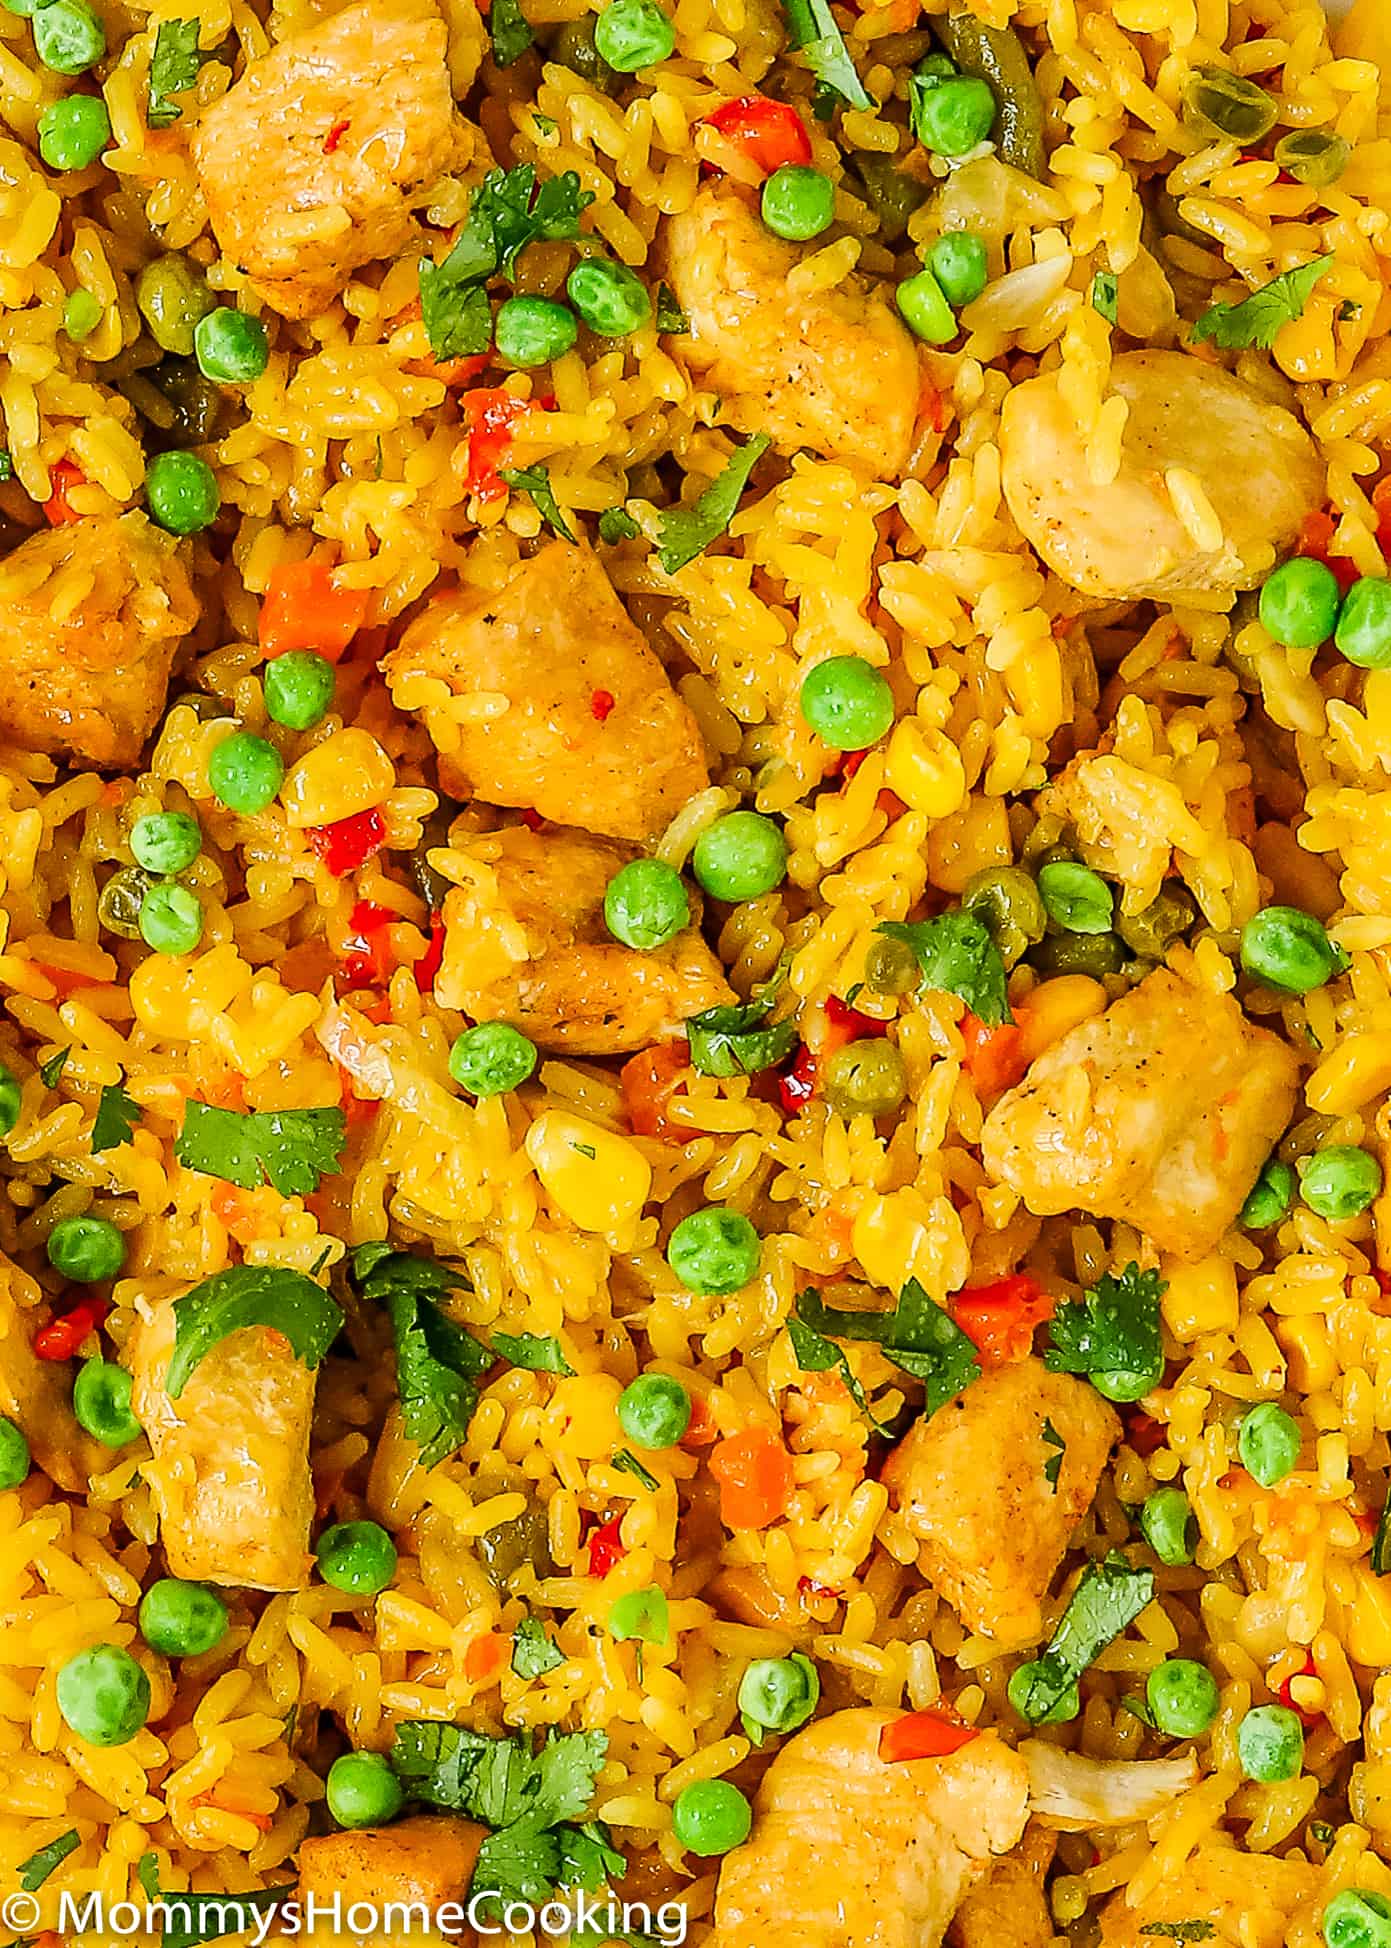 This Easy Instant Pot Arroz con Pollo recipe is ridiculously easy to make and unbelievably delicious! It has protein, vegetables, and grains cooked together in one pot in about 30 minutes. This one is definitely one to keep in your rotation. https://mommyshomecooking.com